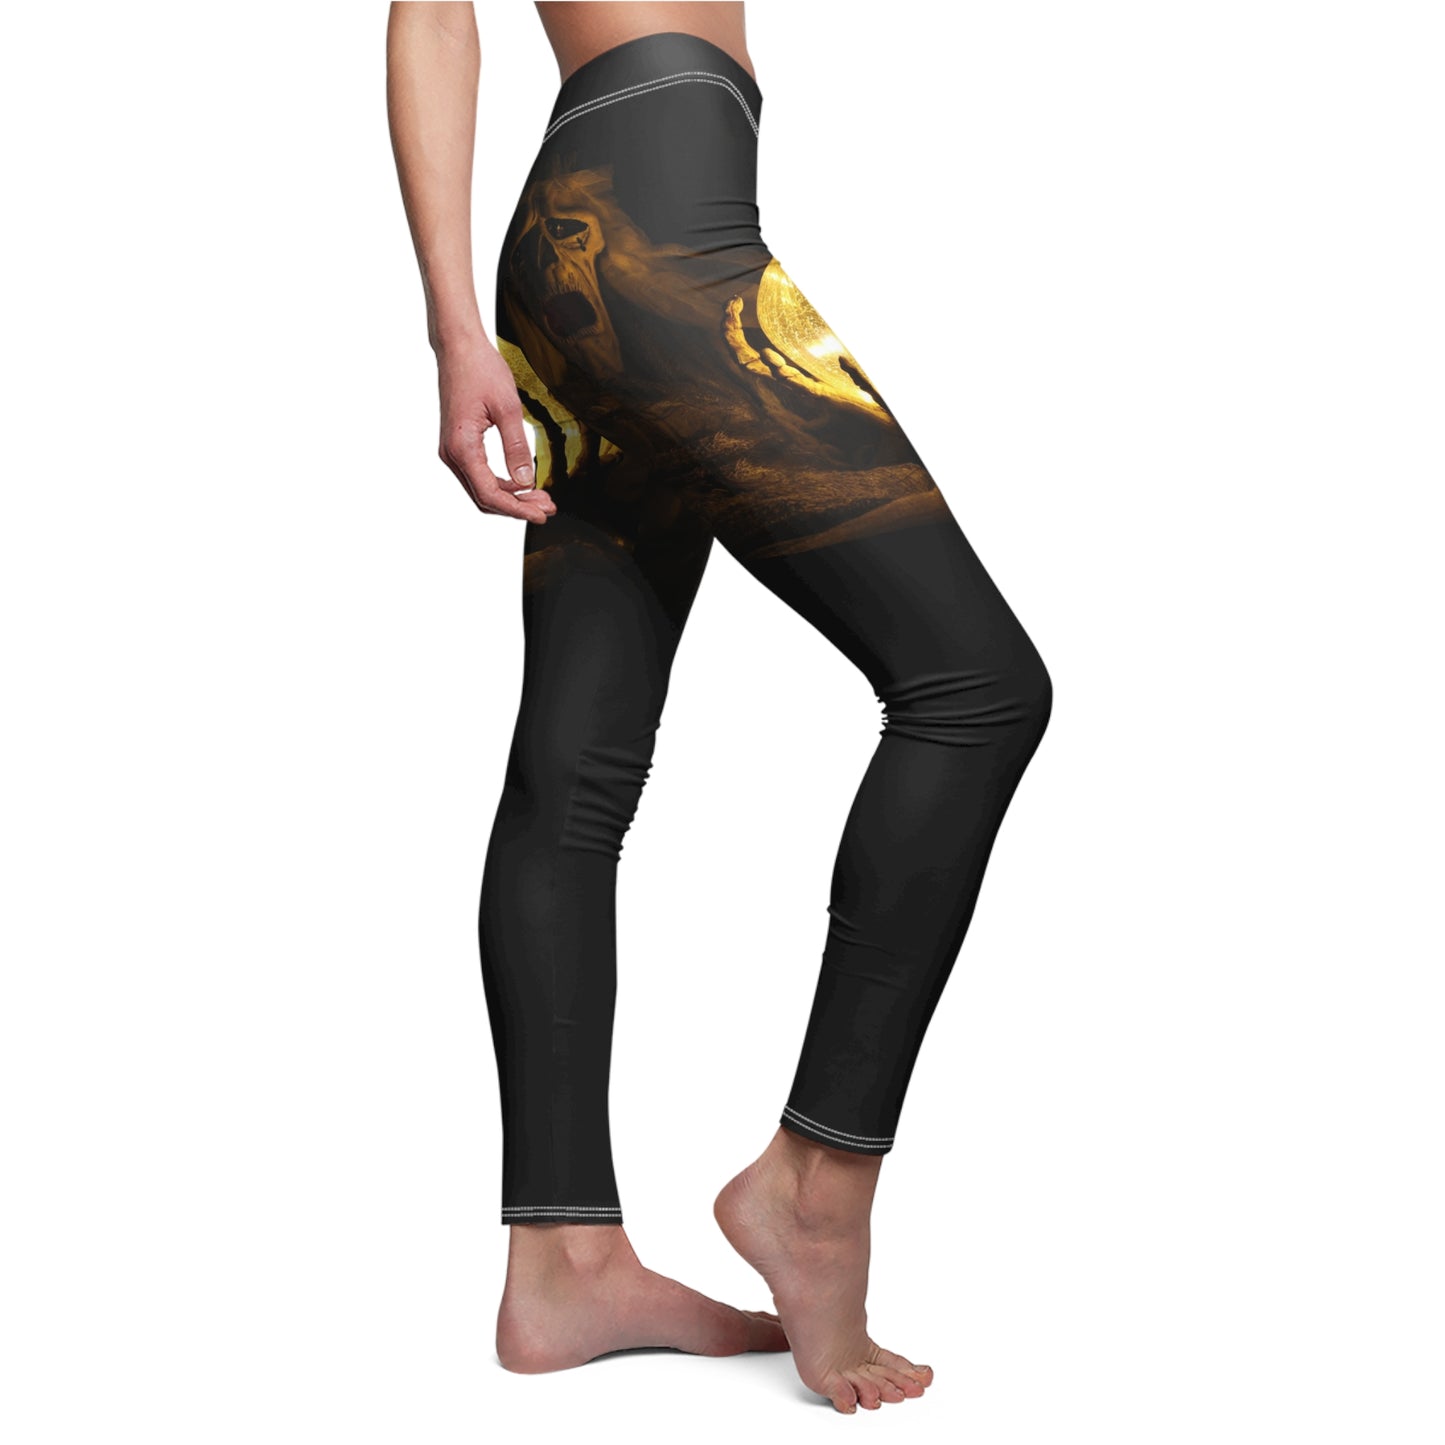 These Halloween Skeleton leggings make a great statement piece for your wardrobe. Made from a lightweight, breathable fabric, they're comfortable and perfect for any outdoor activity or staying in and watching horror movies.